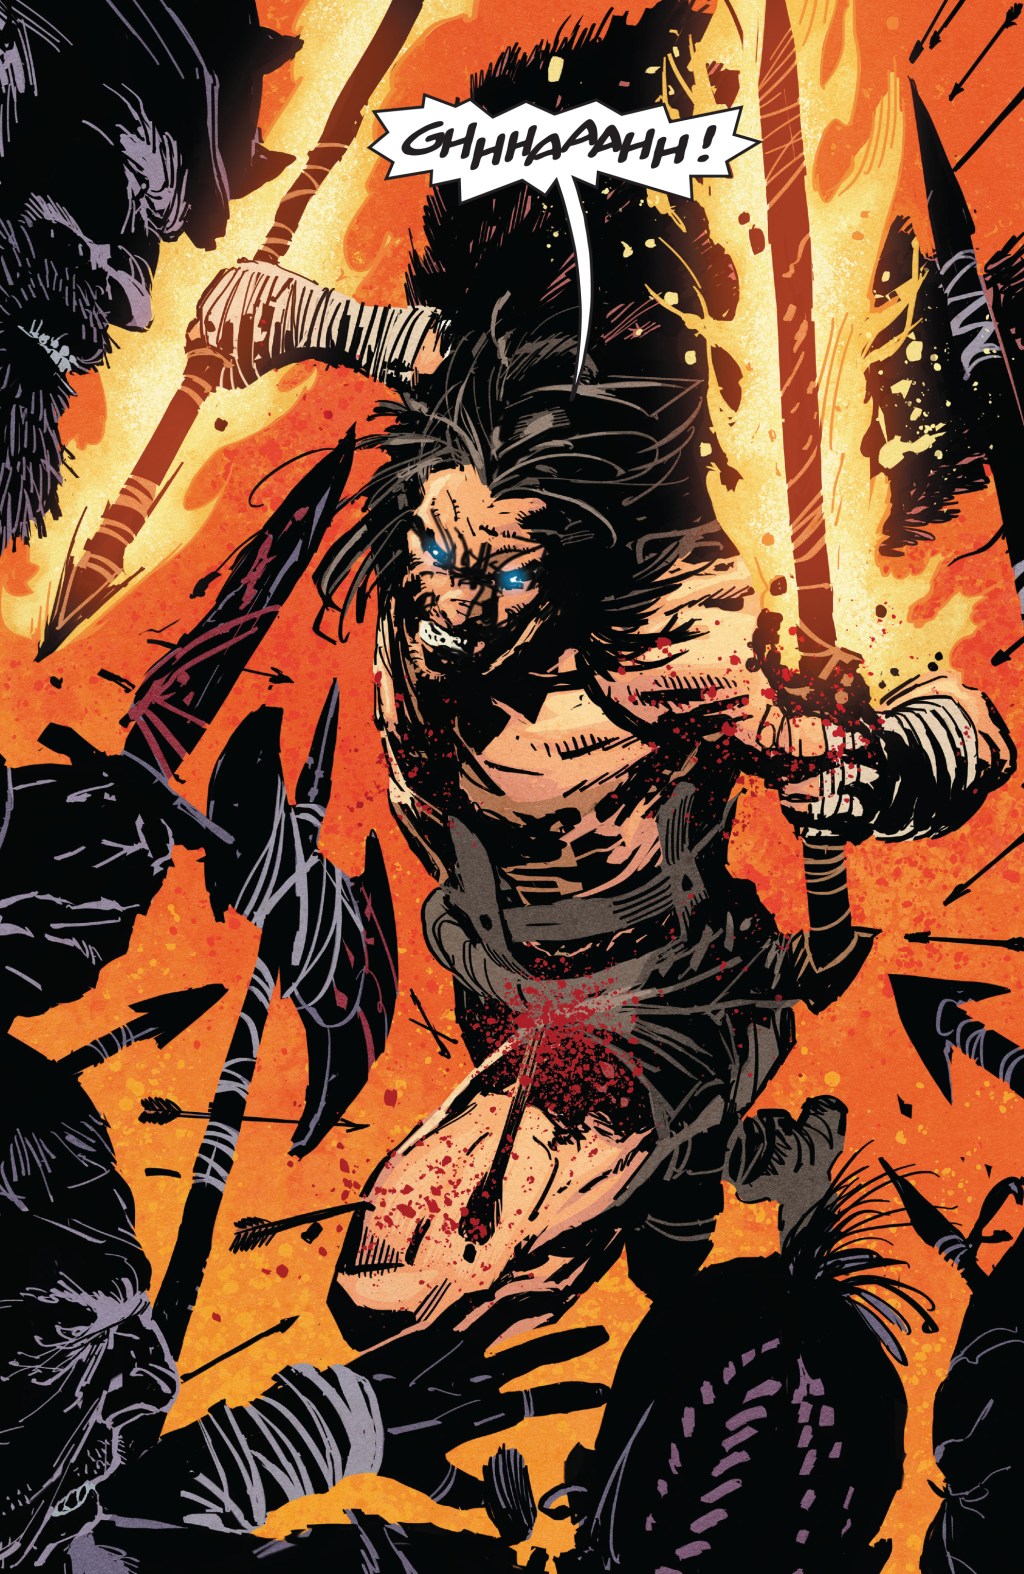 B plunges into battle against a prehistoric tribe in BRZRKR Vol. 1 #4 (2021), BOOM! Studios. Text by Keanue Reeves and Matt Kindt, art by Ron Garney, Bill Crabtree and Clem Robins.